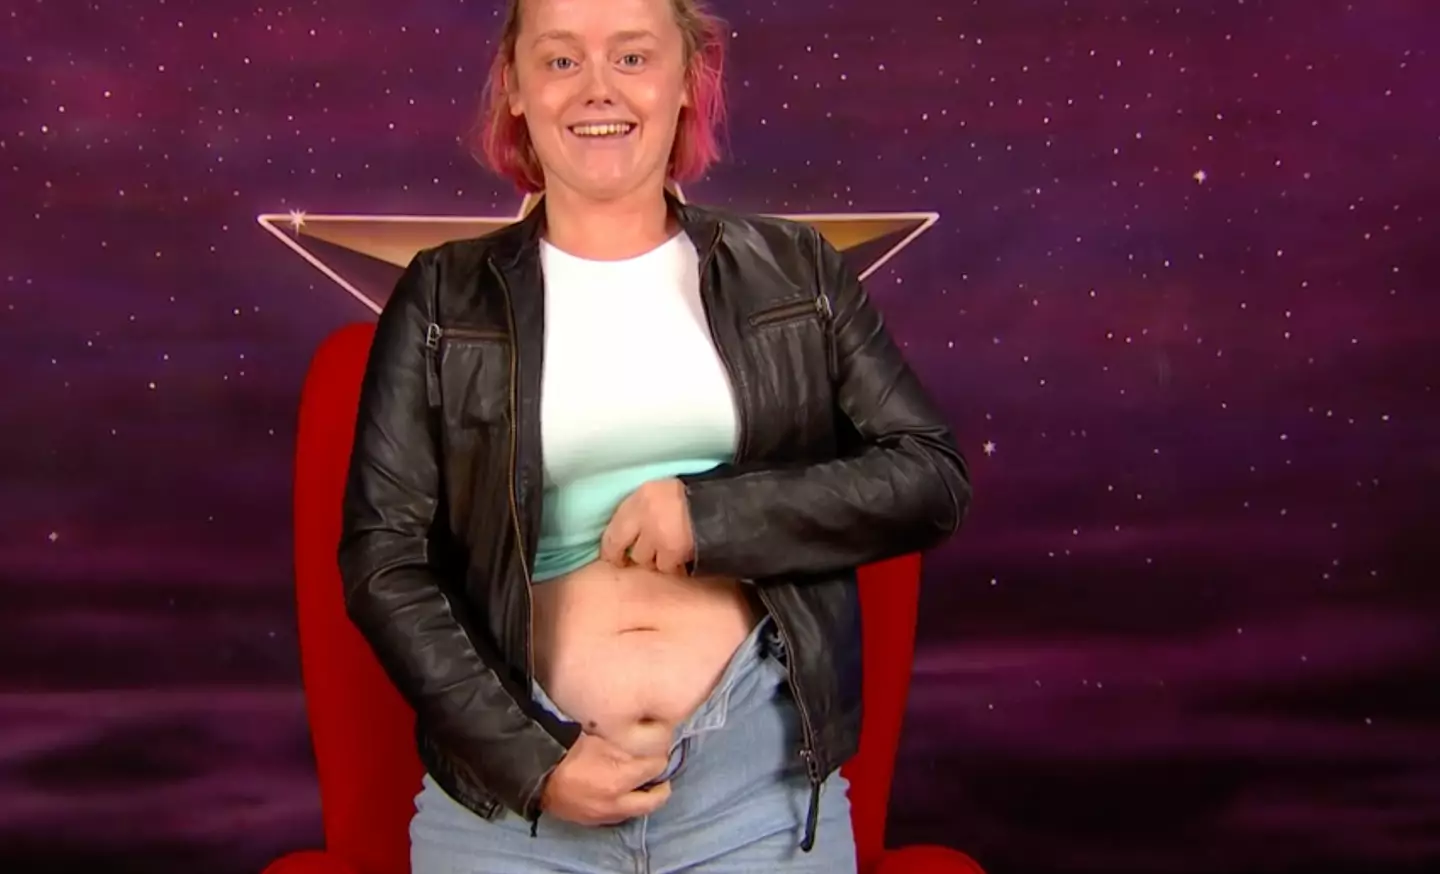 Jenny revealed her two belly buttons on the show.